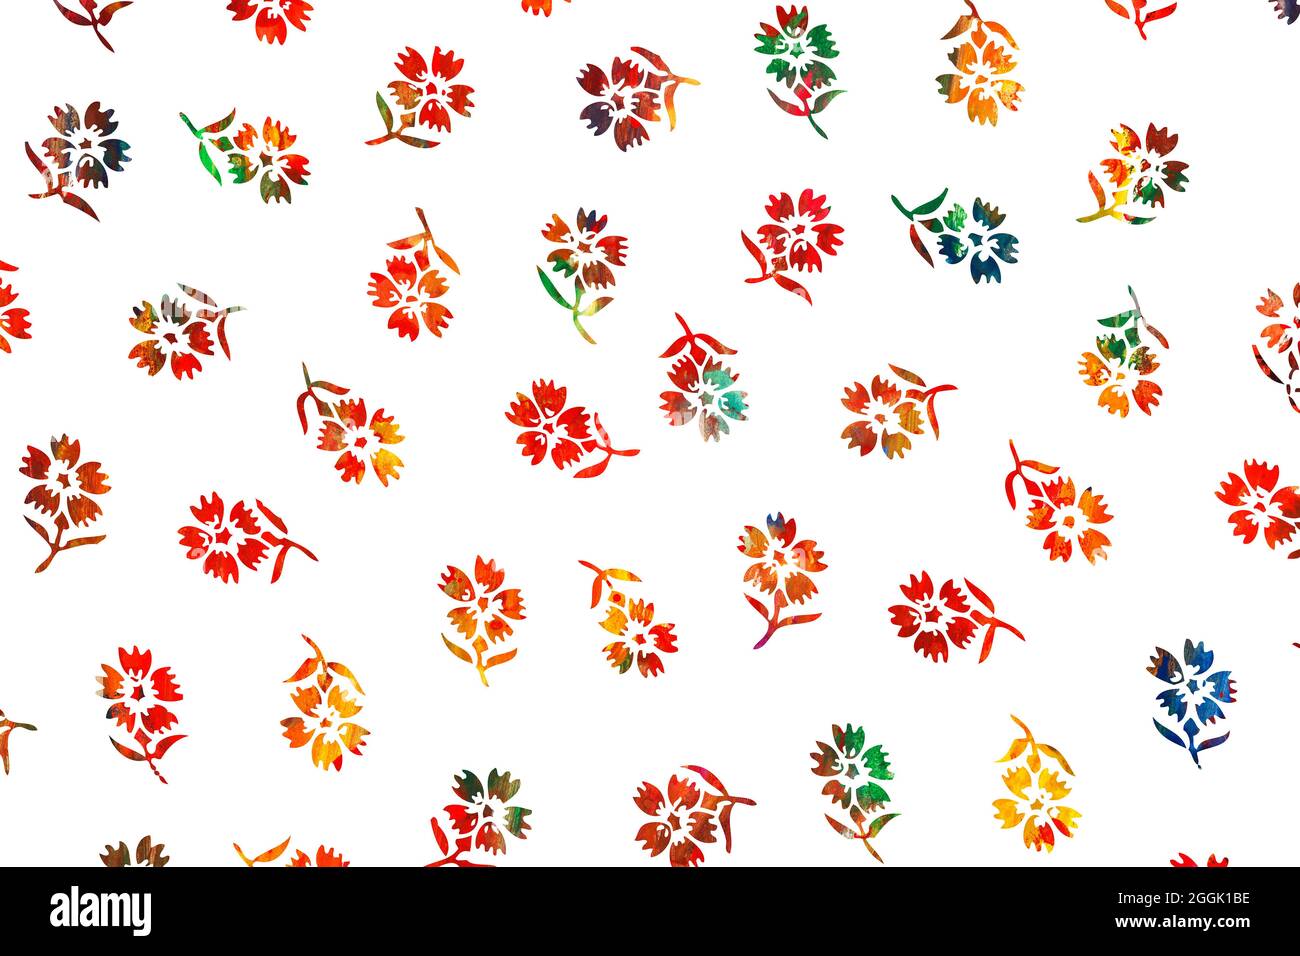 Floral pattern in watercolors Stock Photo